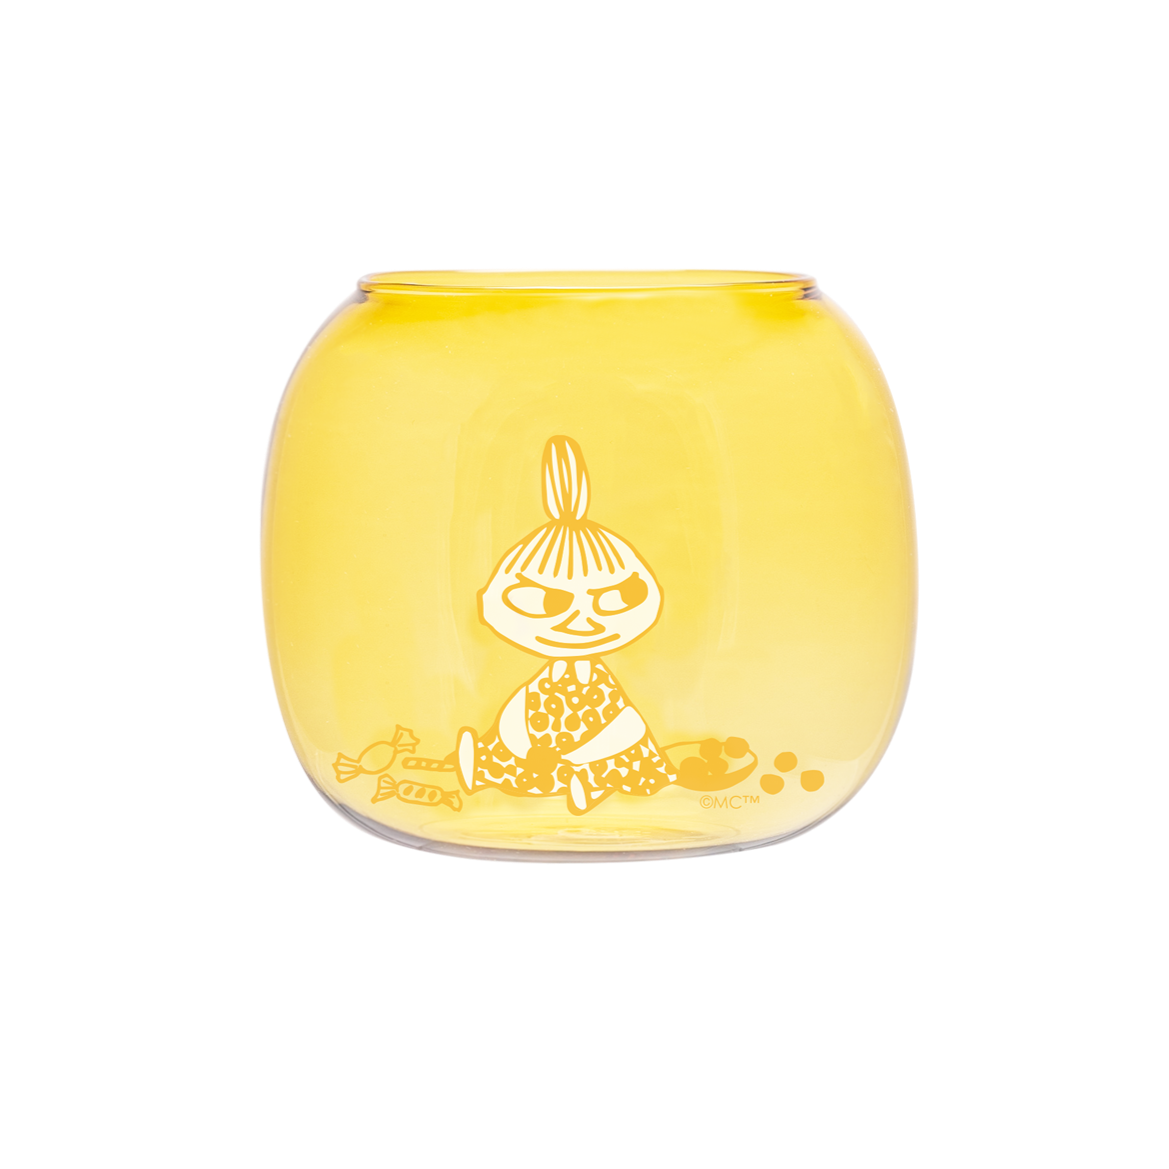 MOOMIN - Tealight Candle Holder, Little My, Yellow. 741-095-04